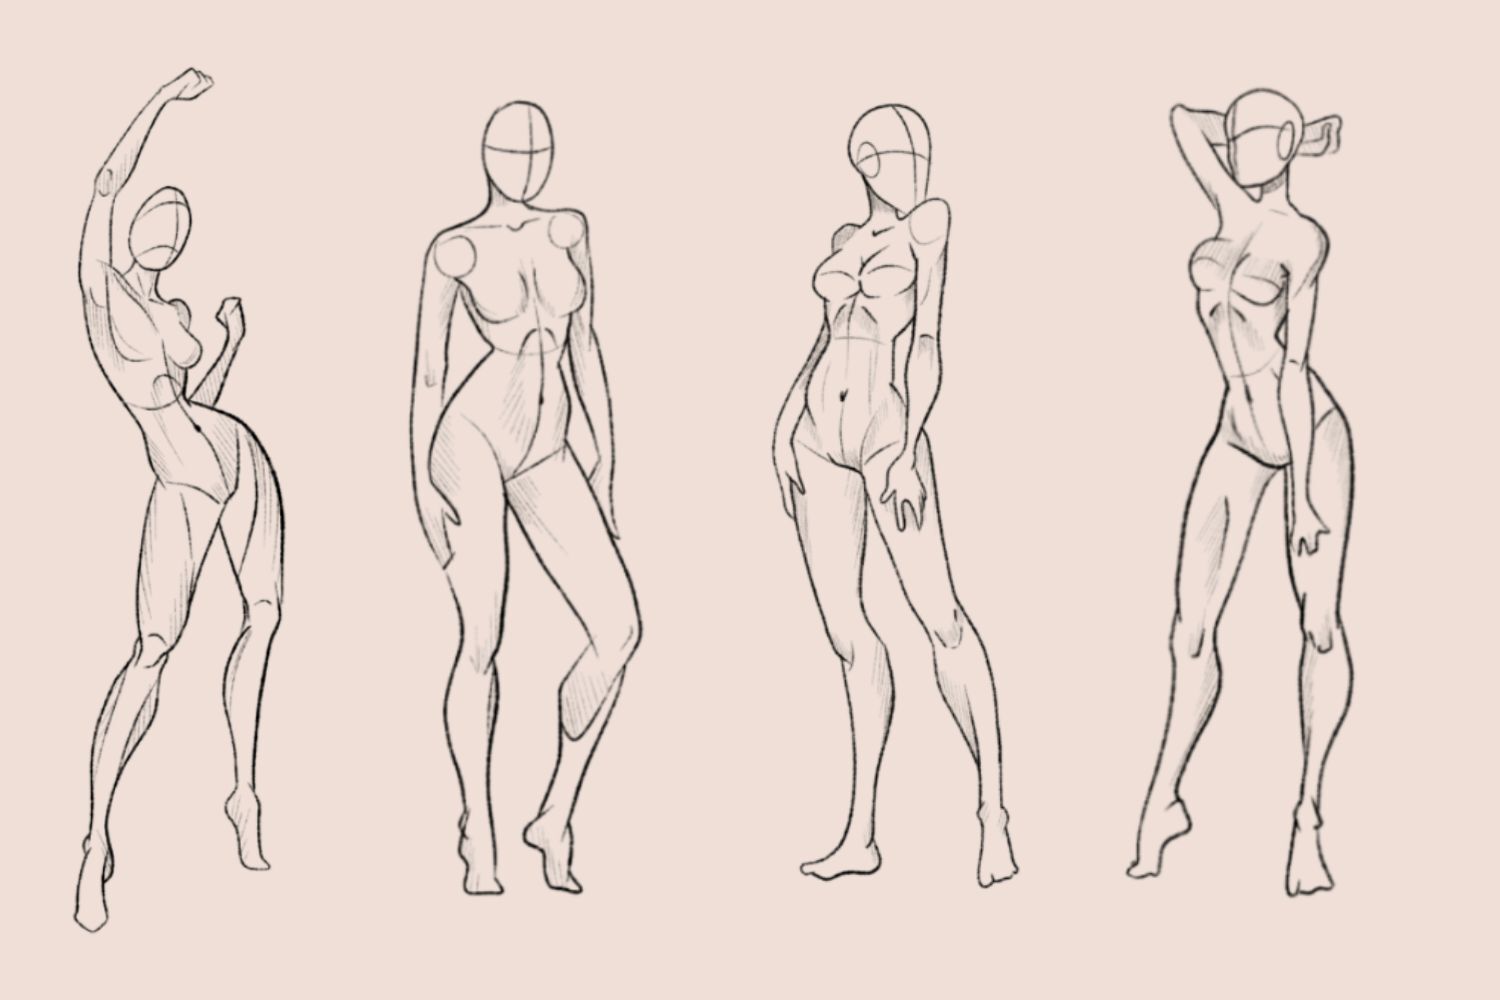 25 Procreate Stamp Body Reference Female